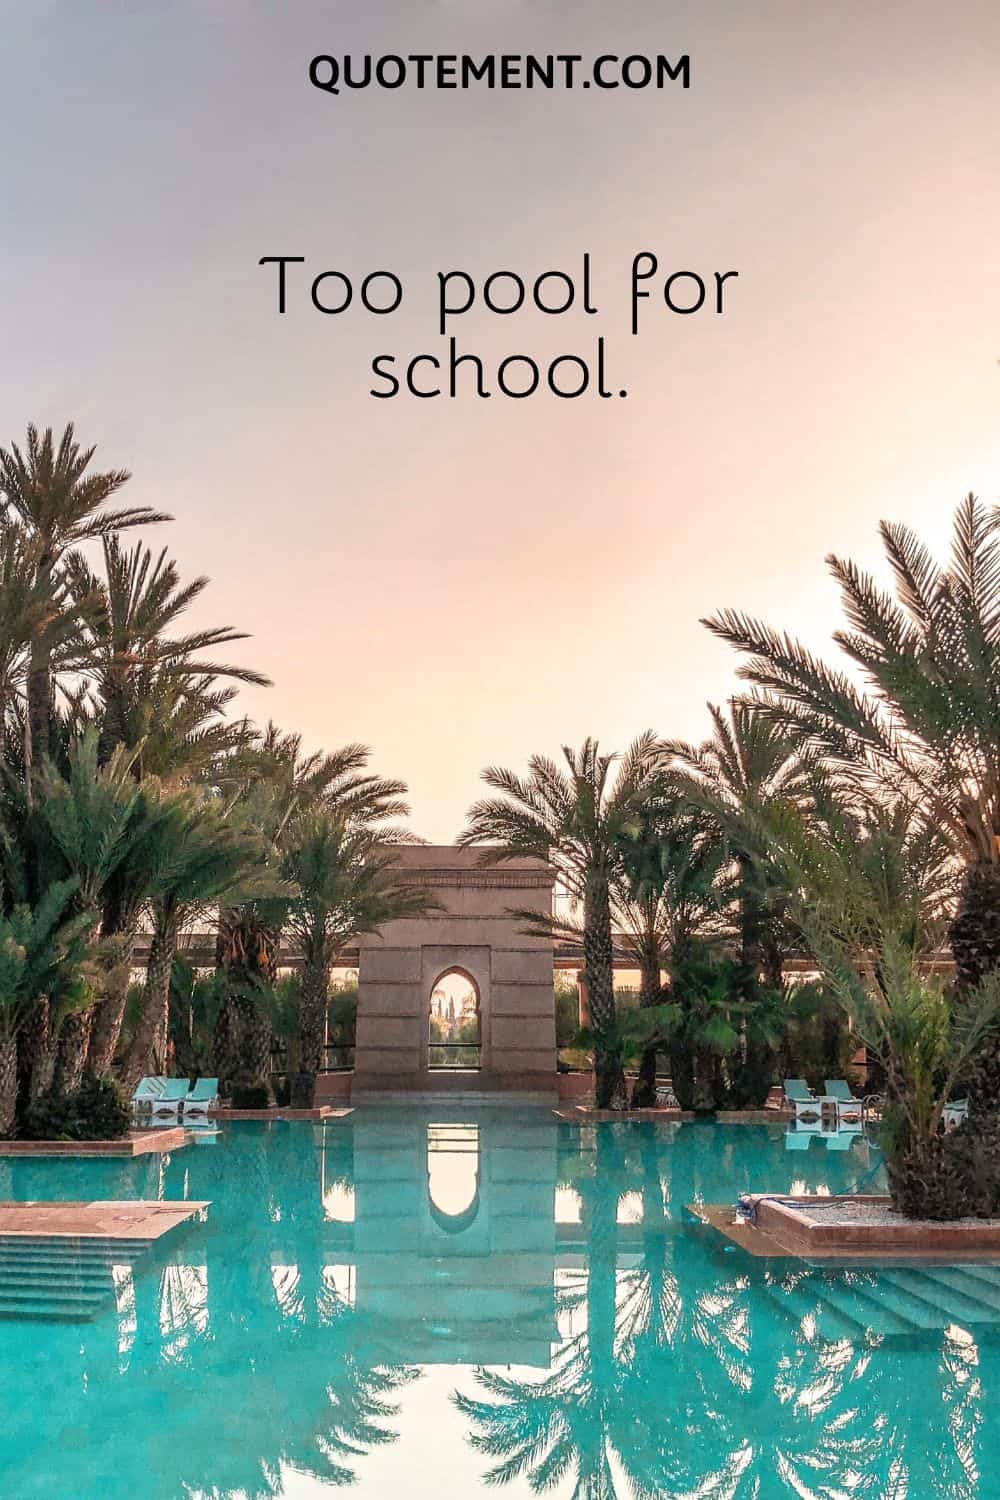 Too pool for school.